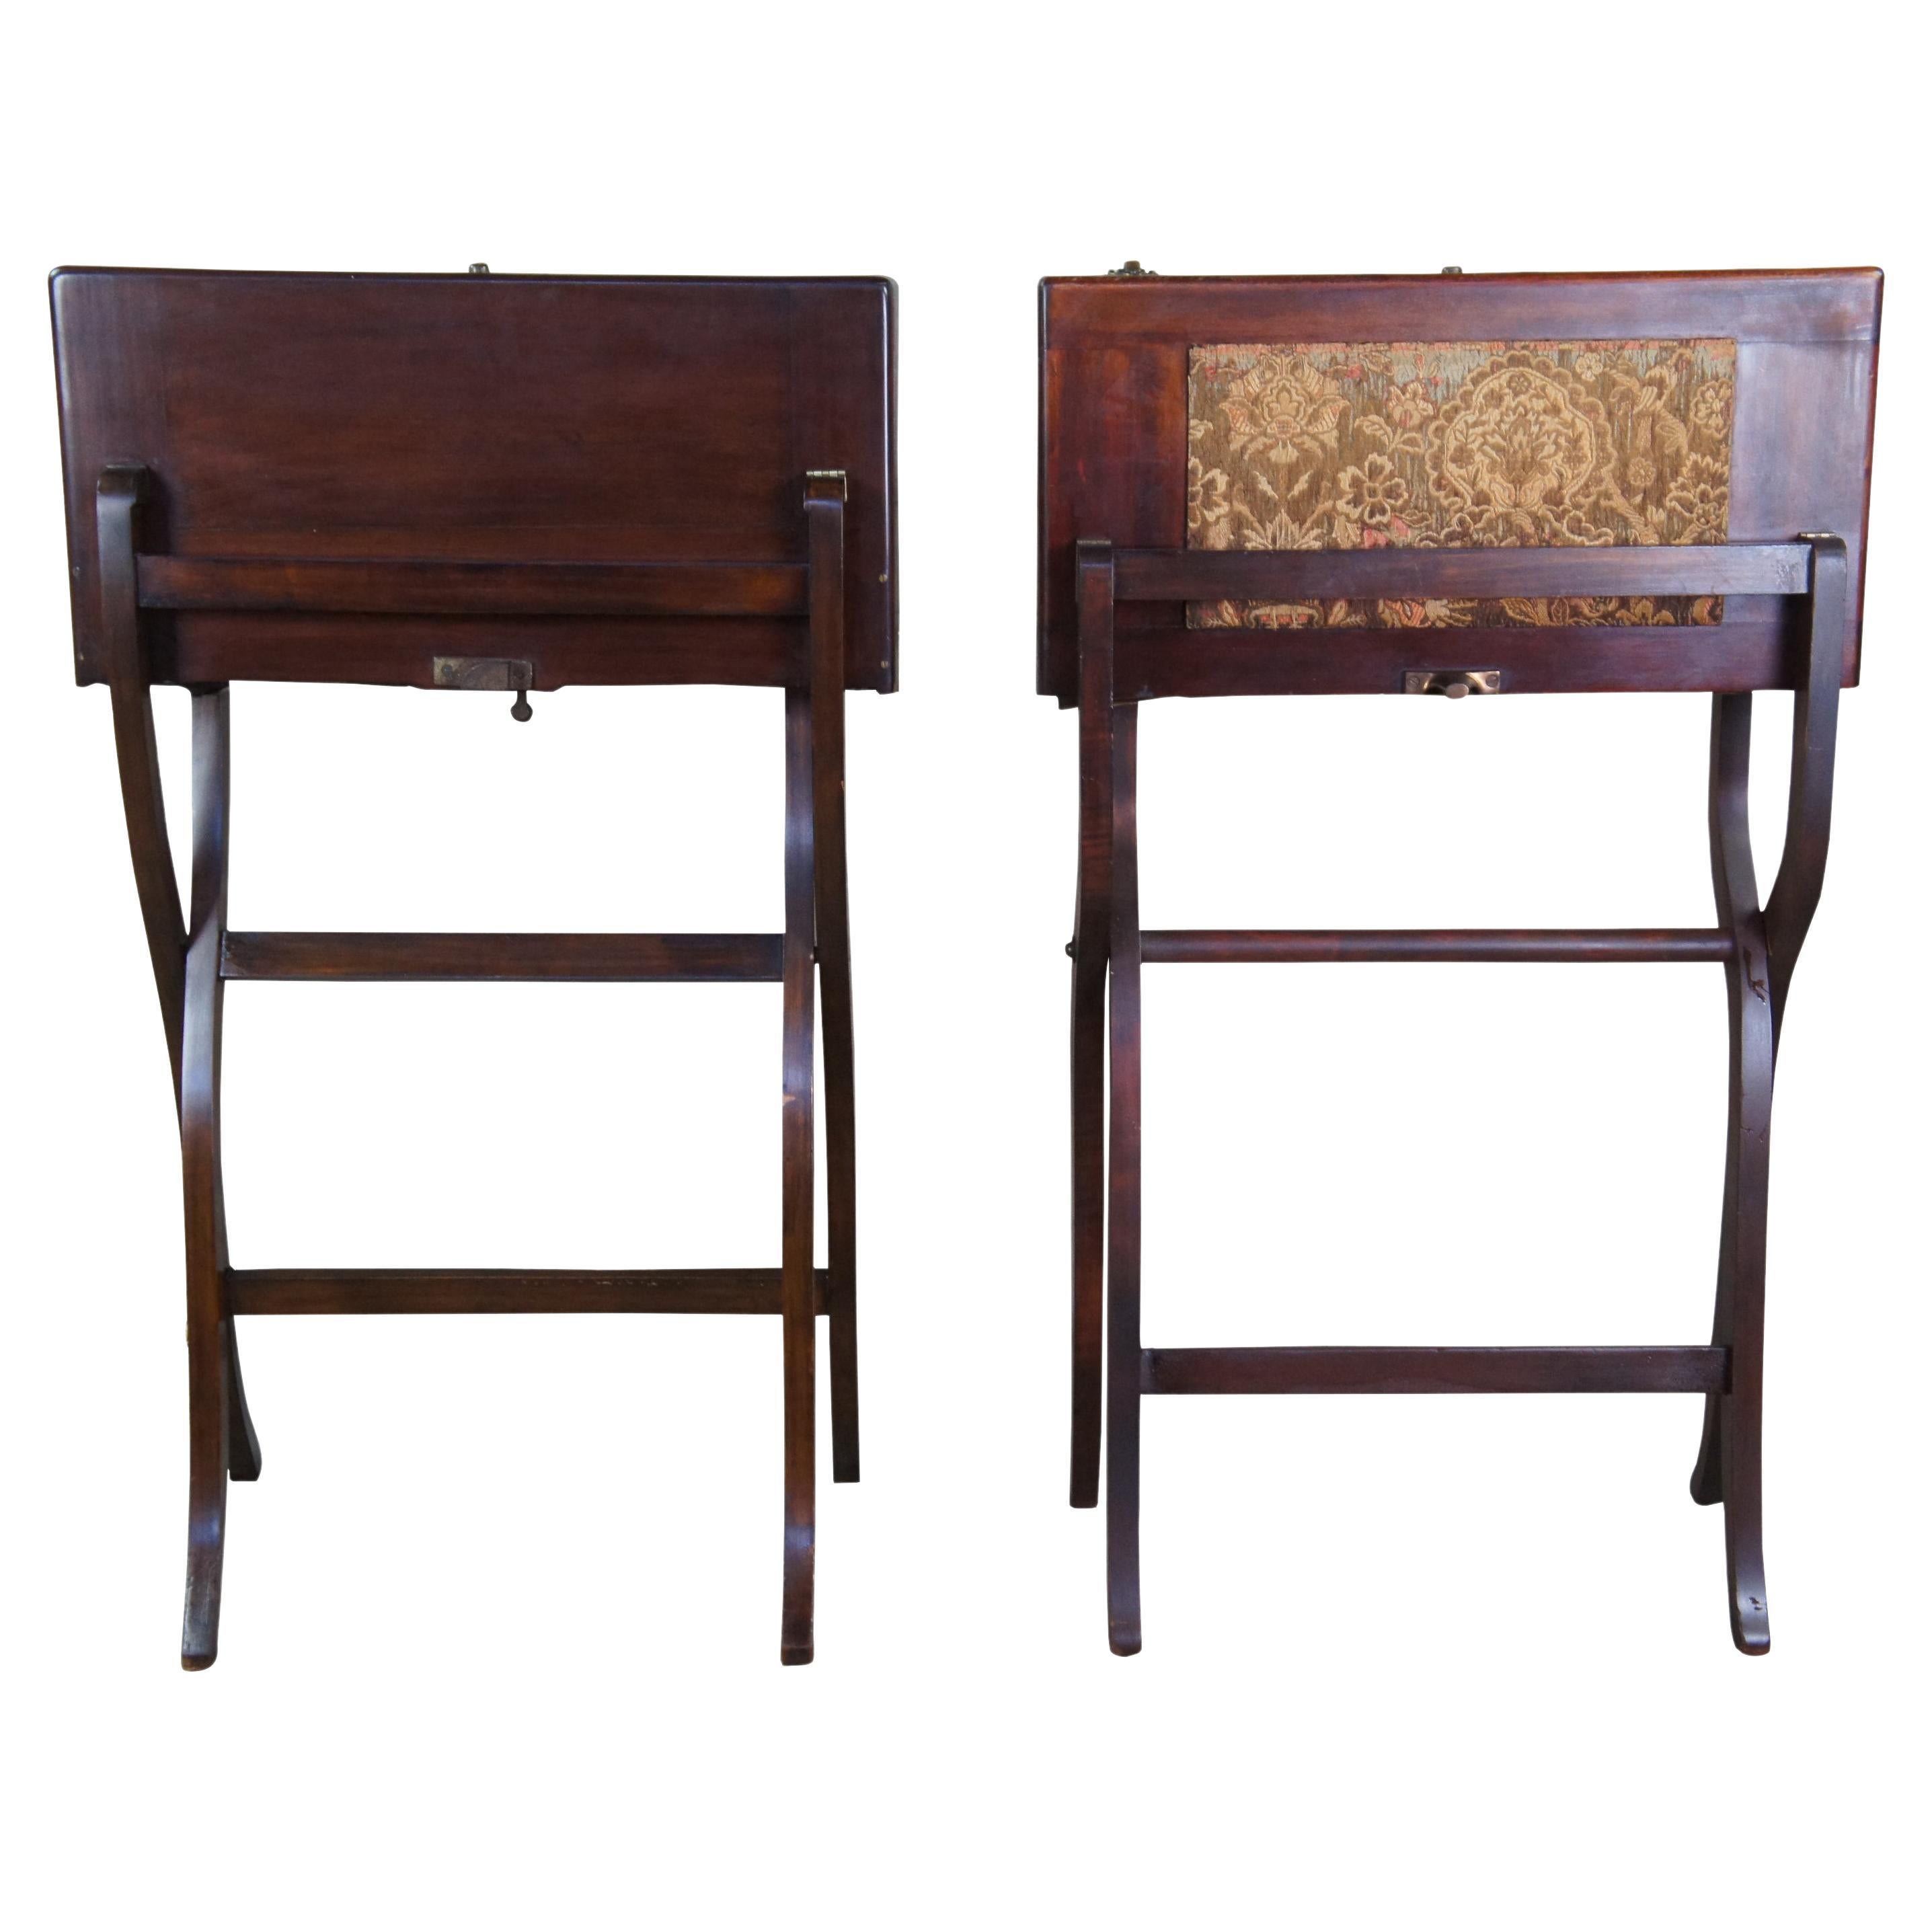 2 Civil War era British campaign writing desks.  Made of mahogany featuring a folding form that opens to a writing surface complete with inkwells and letter storage.  Slightly different forms and interiors, one boasting a needlepoint exterior